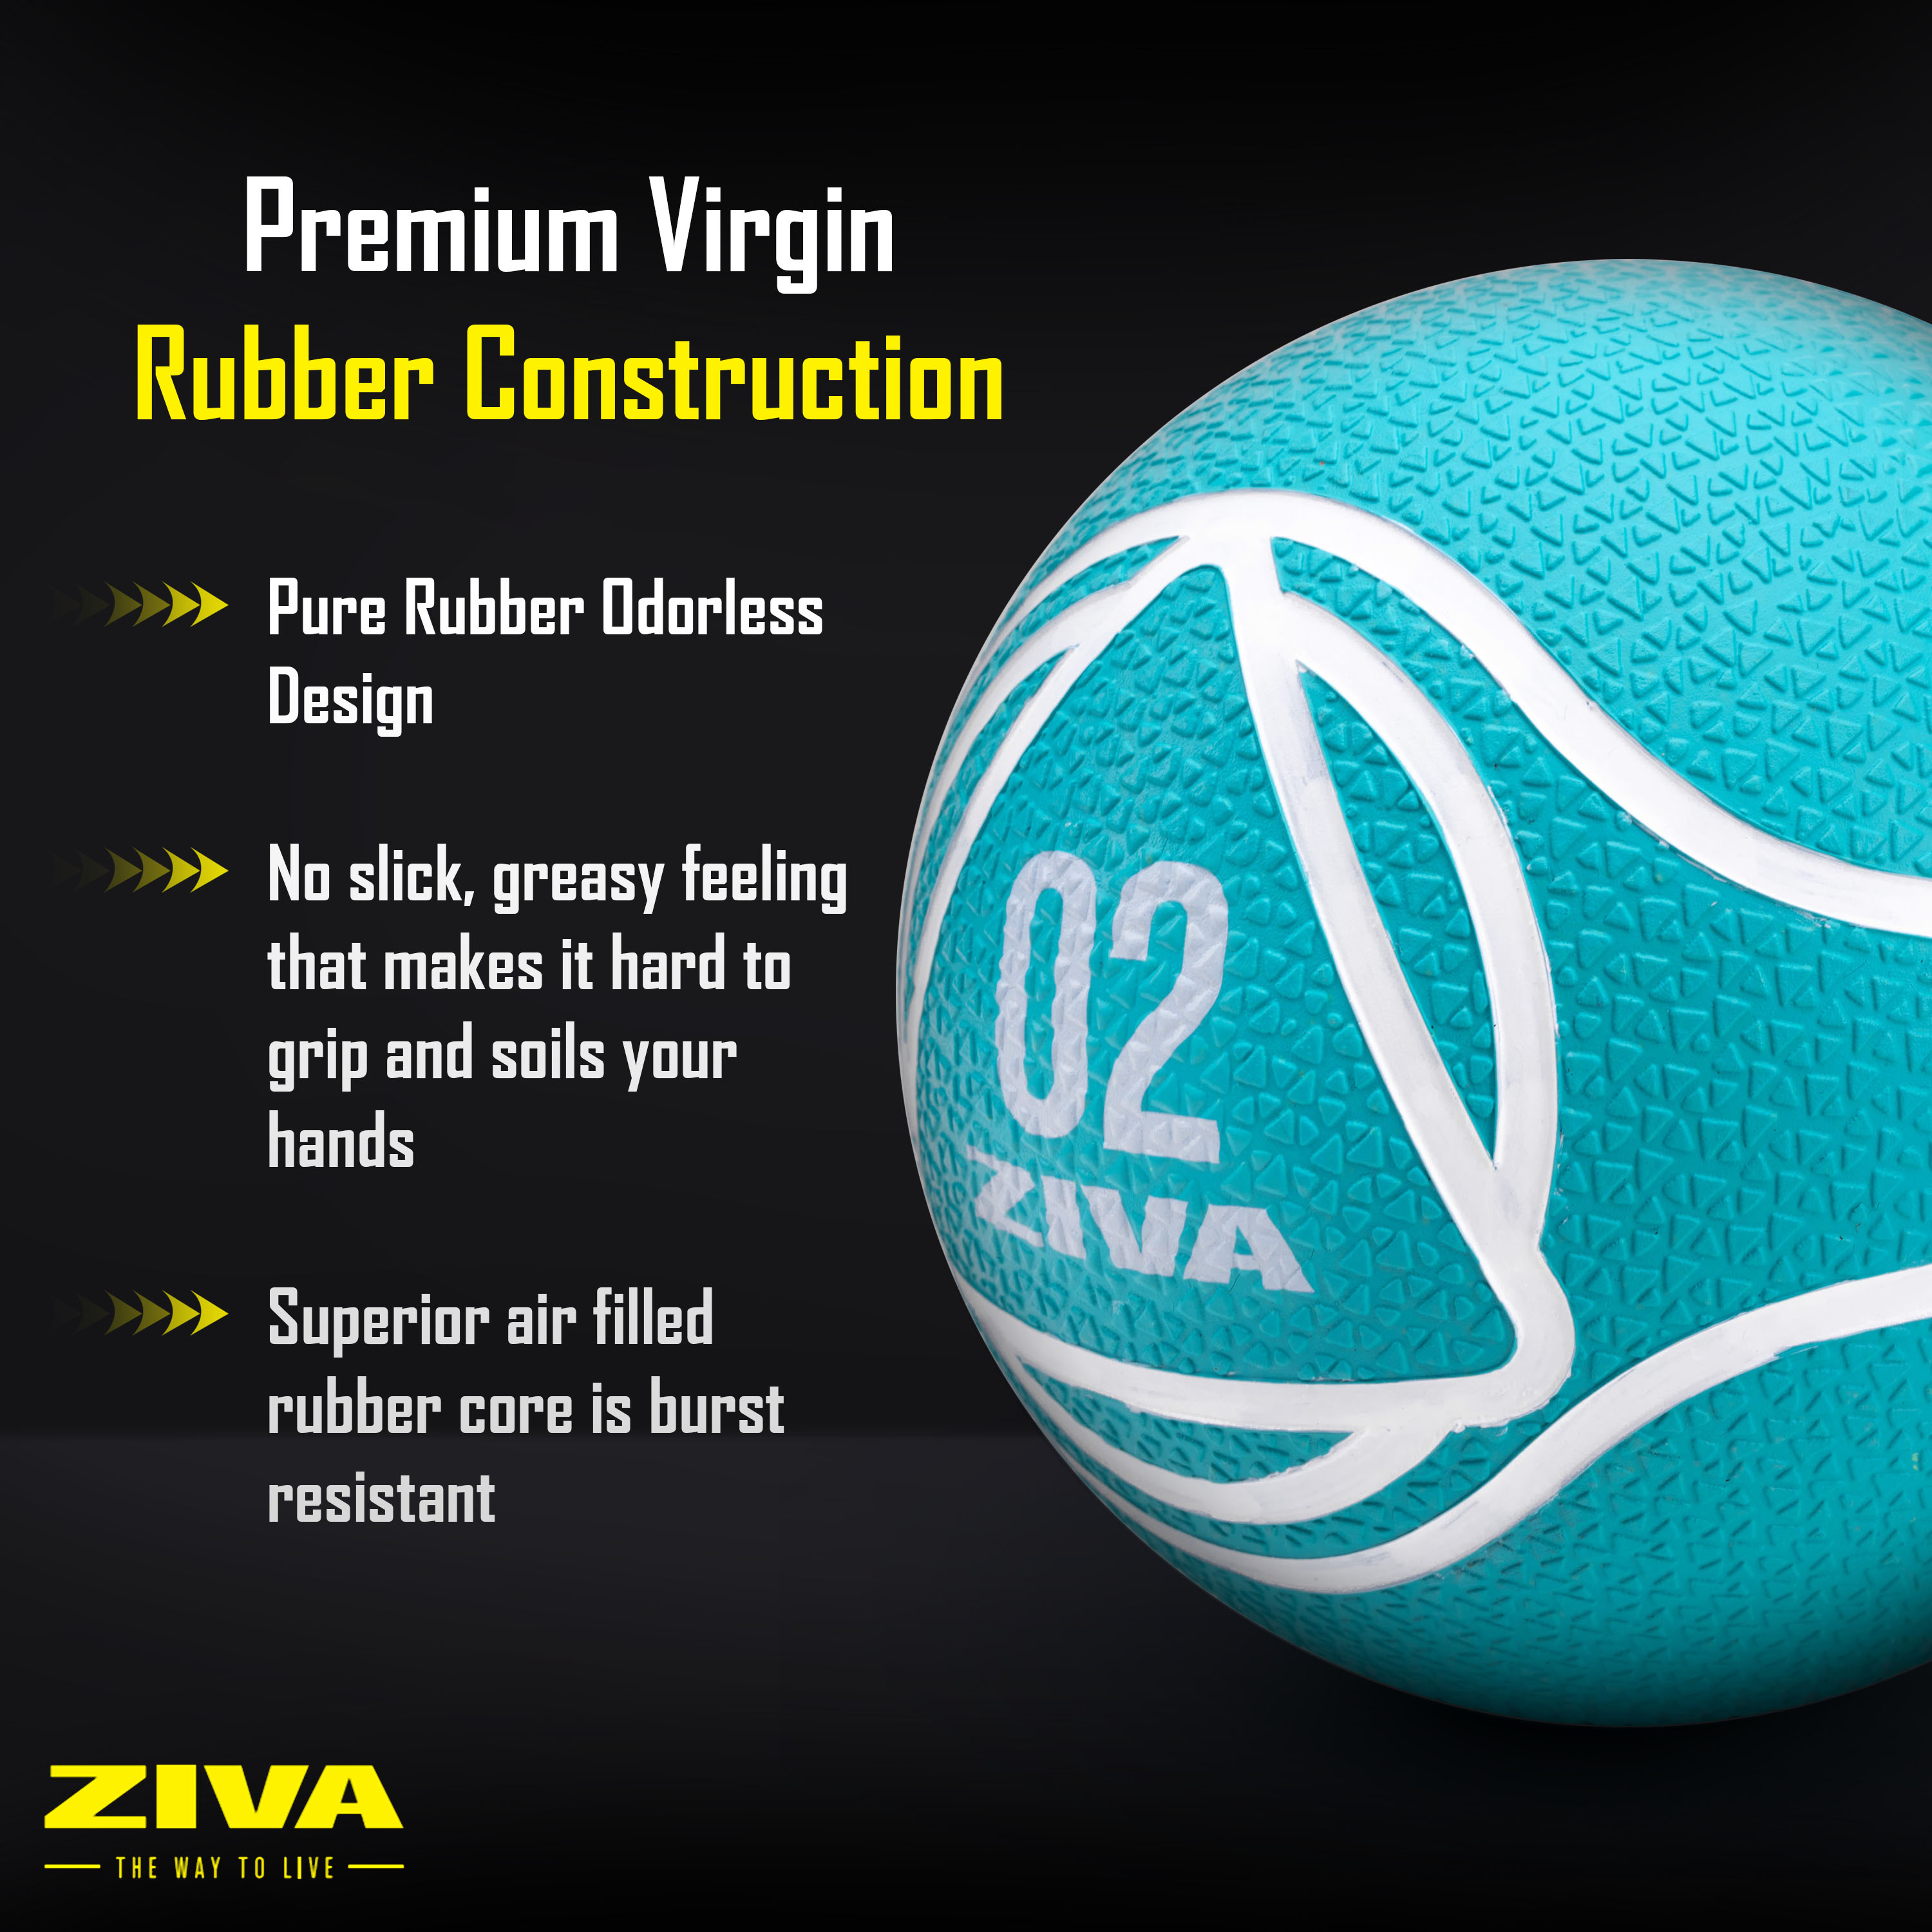 Premium virgin rubber construction. Pure rubber odorless design. No slick, greasy feeling that makes it hard to grip and soils your hands. Superior air filled rubber core is burst resistant.